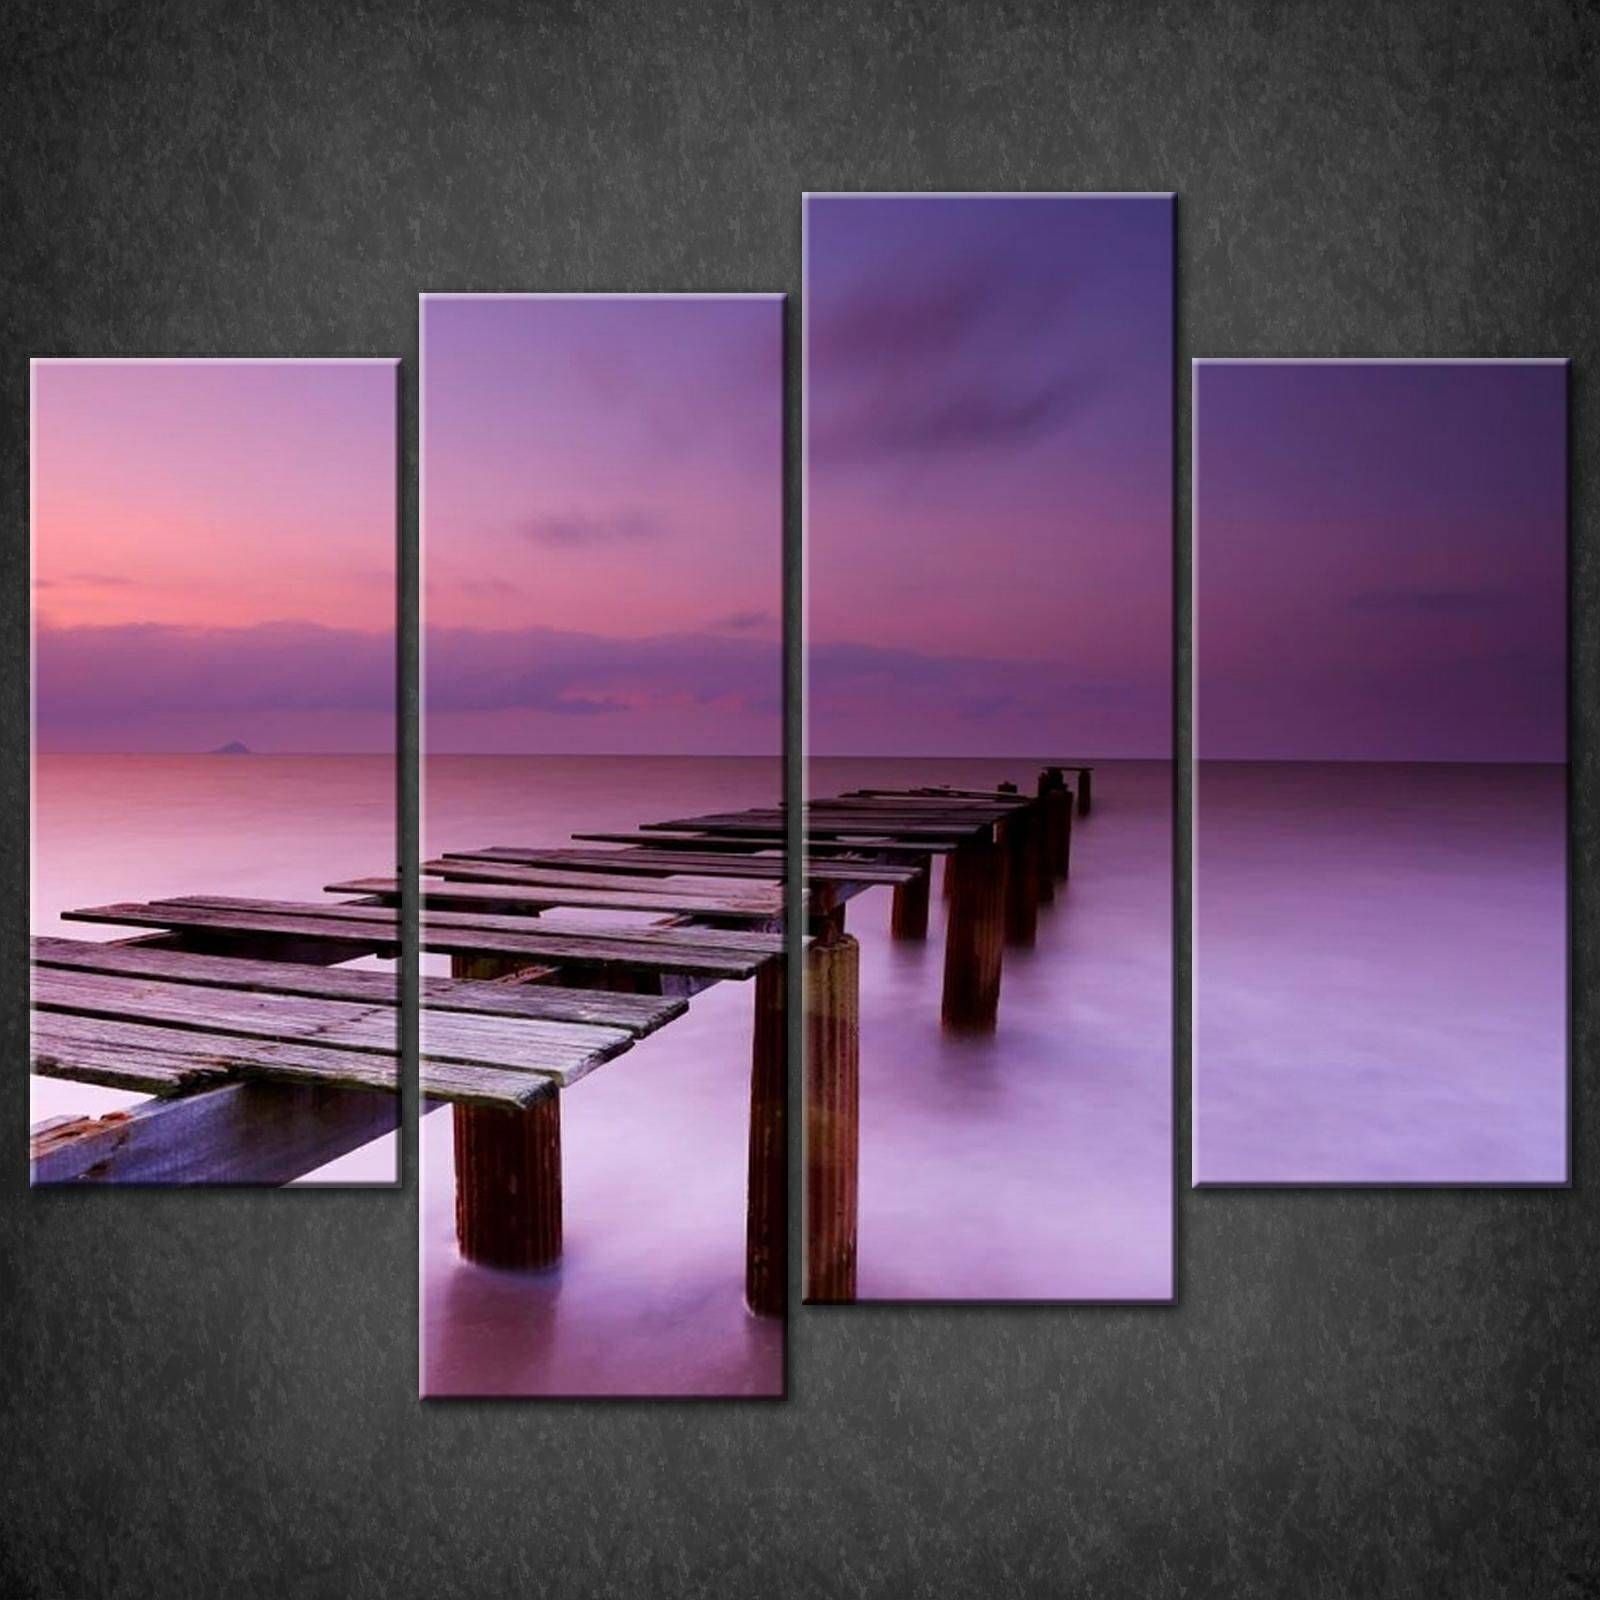 Canvas Print Pictures. High Quality, Handmade, Free Next Day Delivery. Intended For Recent Purple Canvas Wall Art (Gallery 4 of 20)